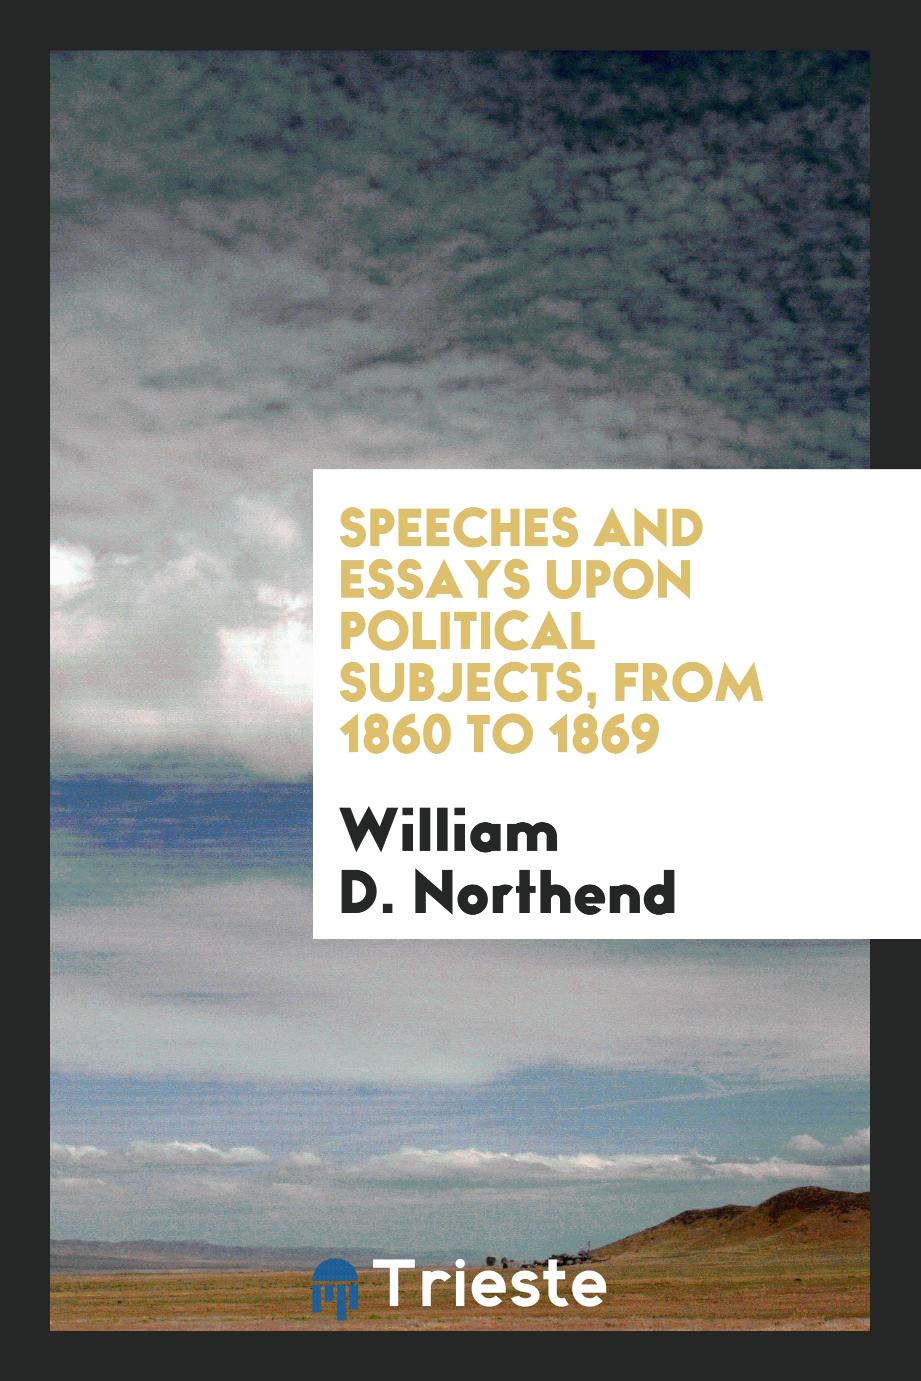 Speeches and essays upon political subjects, from 1860 to 1869